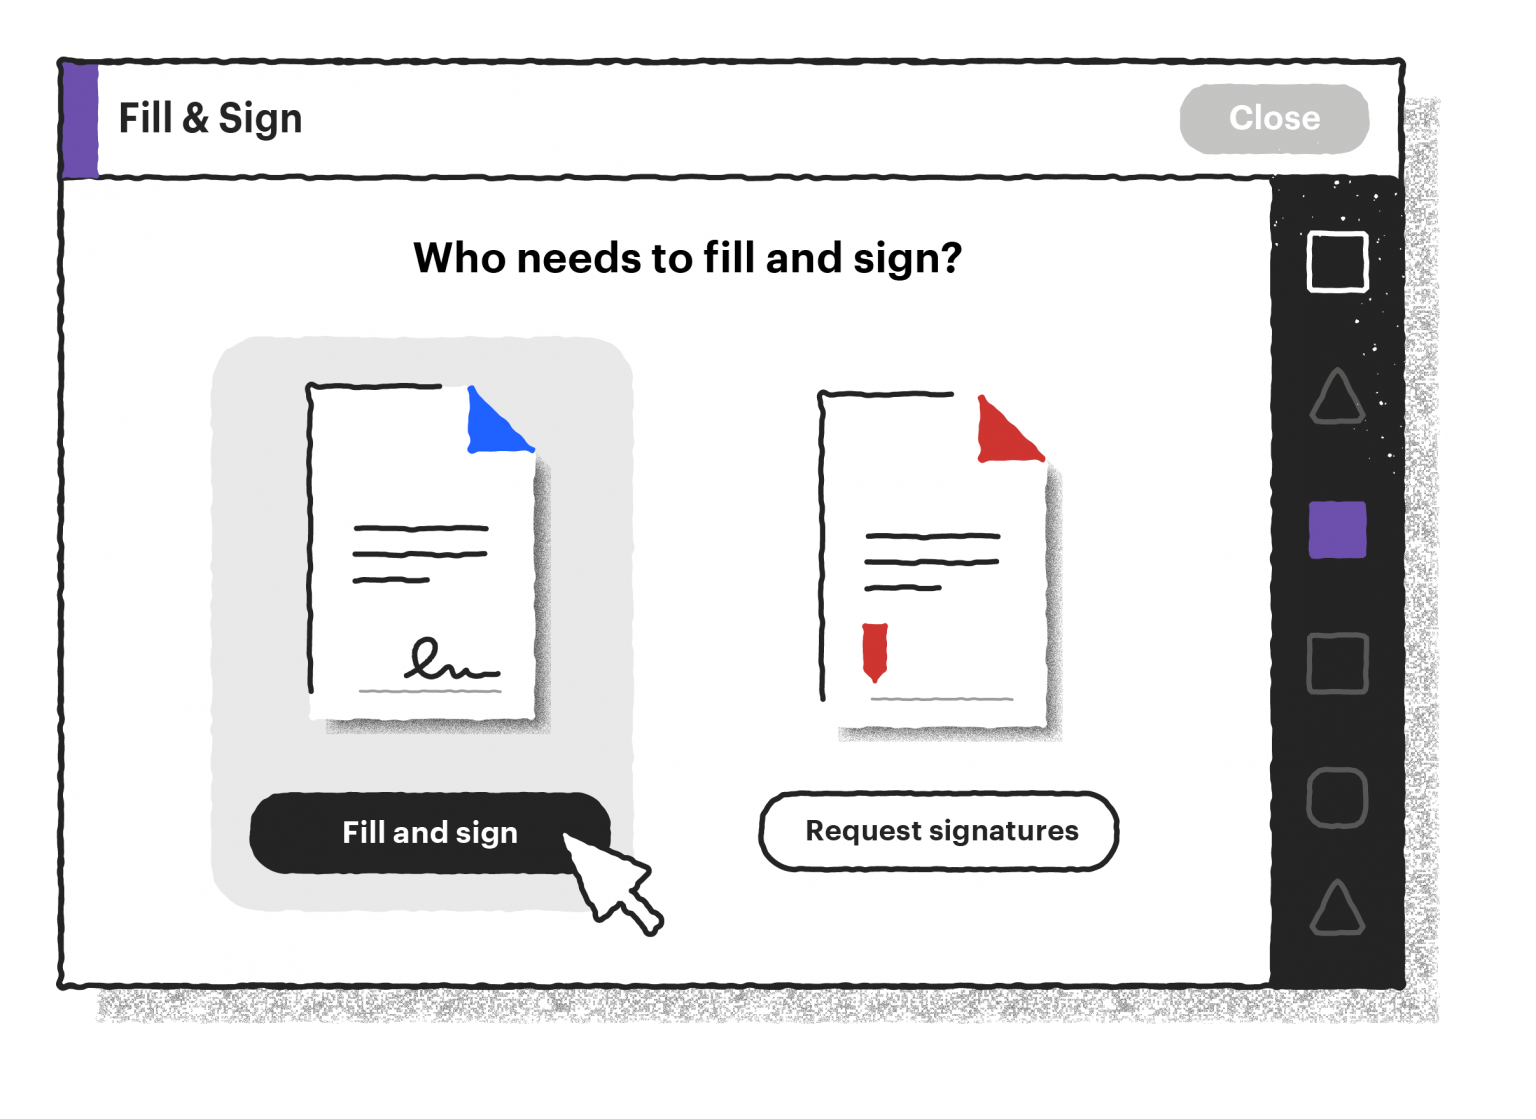 Learn to sign an electronic form with Adobe, Microsoft, or PandaDoc